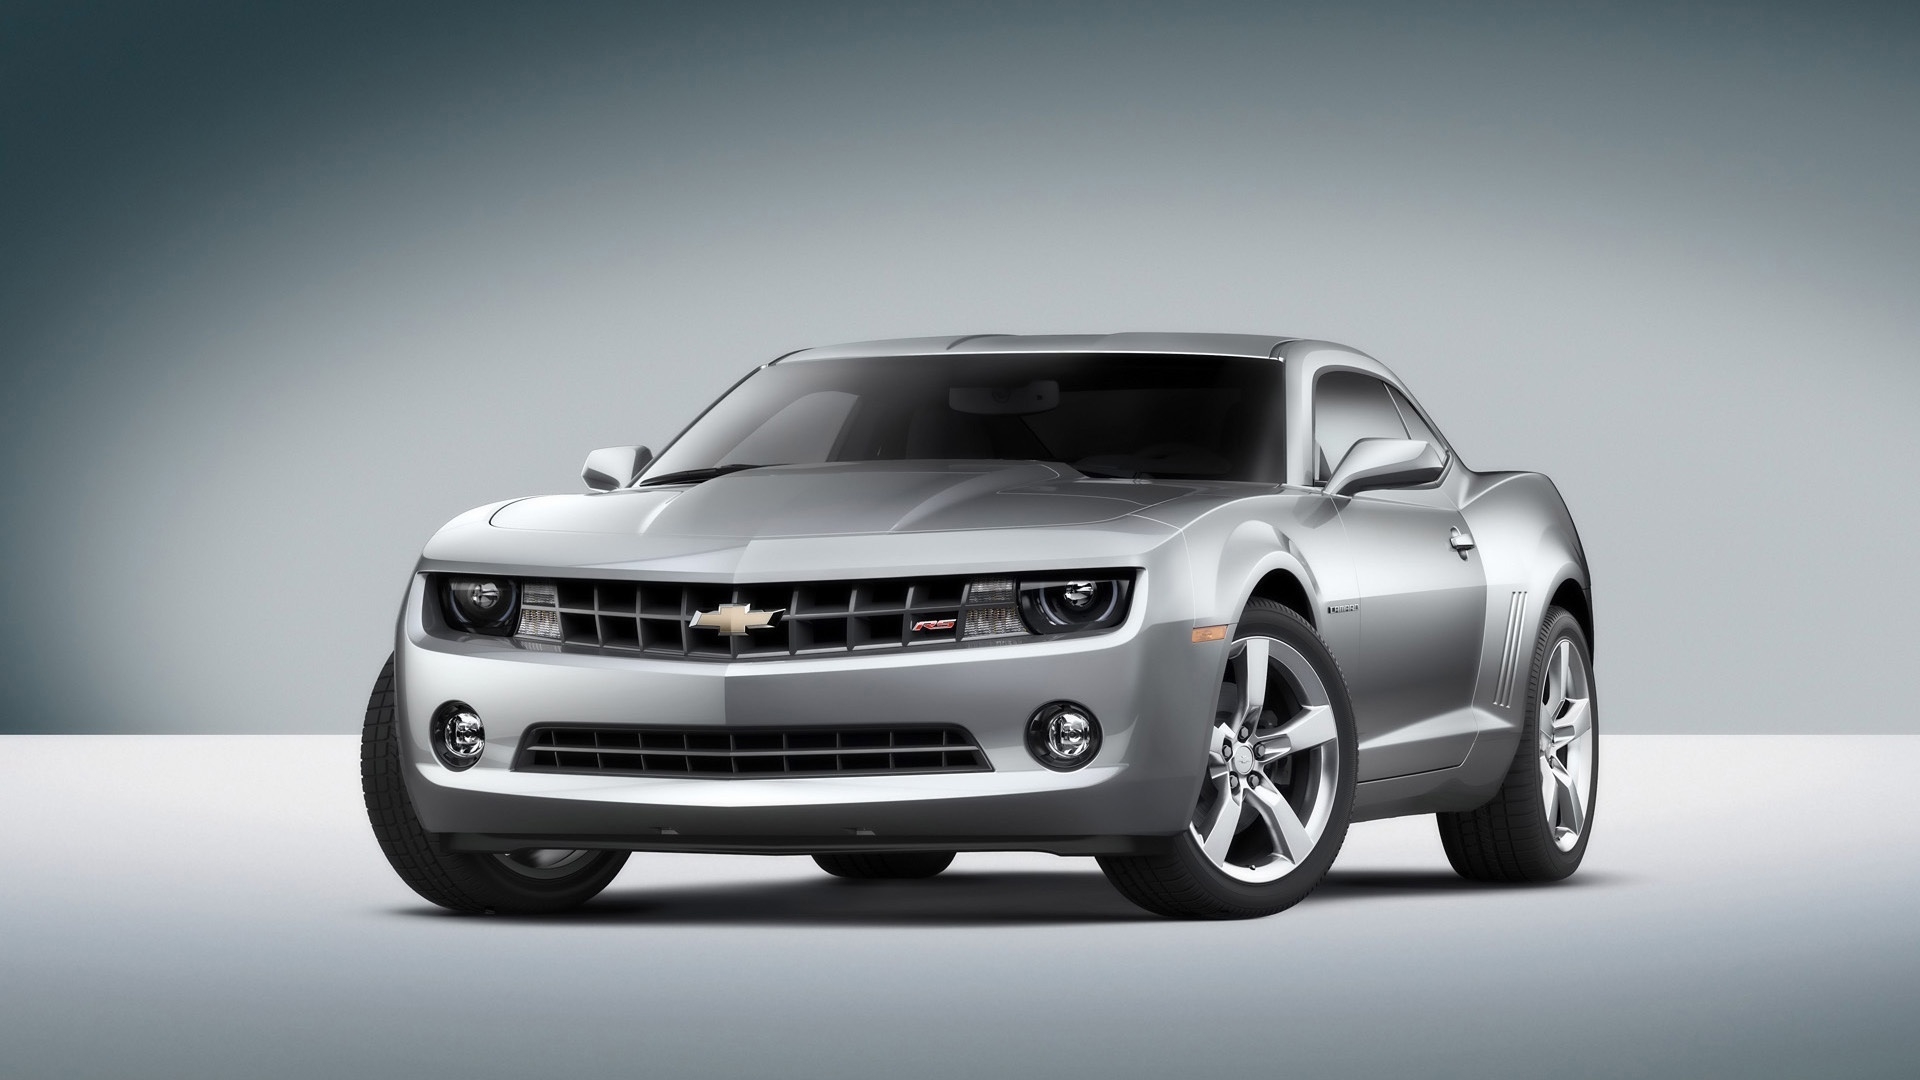 Chevrolet Camaro RS 2010 Grey Front Angle for 1920 x 1080 HDTV 1080p resolution